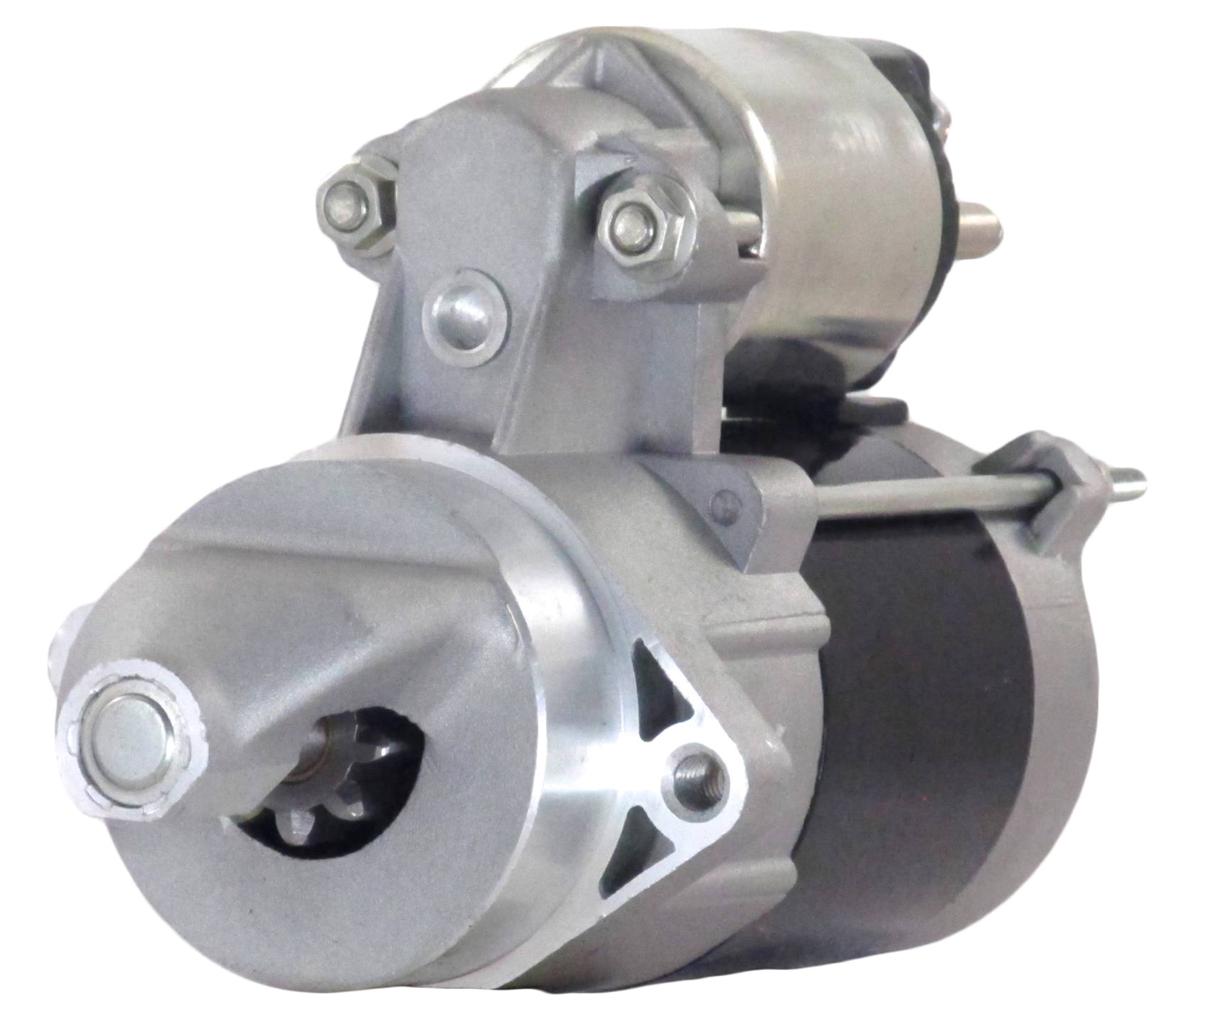 Rareelectrical NEW STARTER MOTOR COMPATIBLE WITH SKI DOO SNOWMOBILE MX Z 380 440 500 SCANDIC 500 550 LT 440 410-212-400 410212400 128000-4291